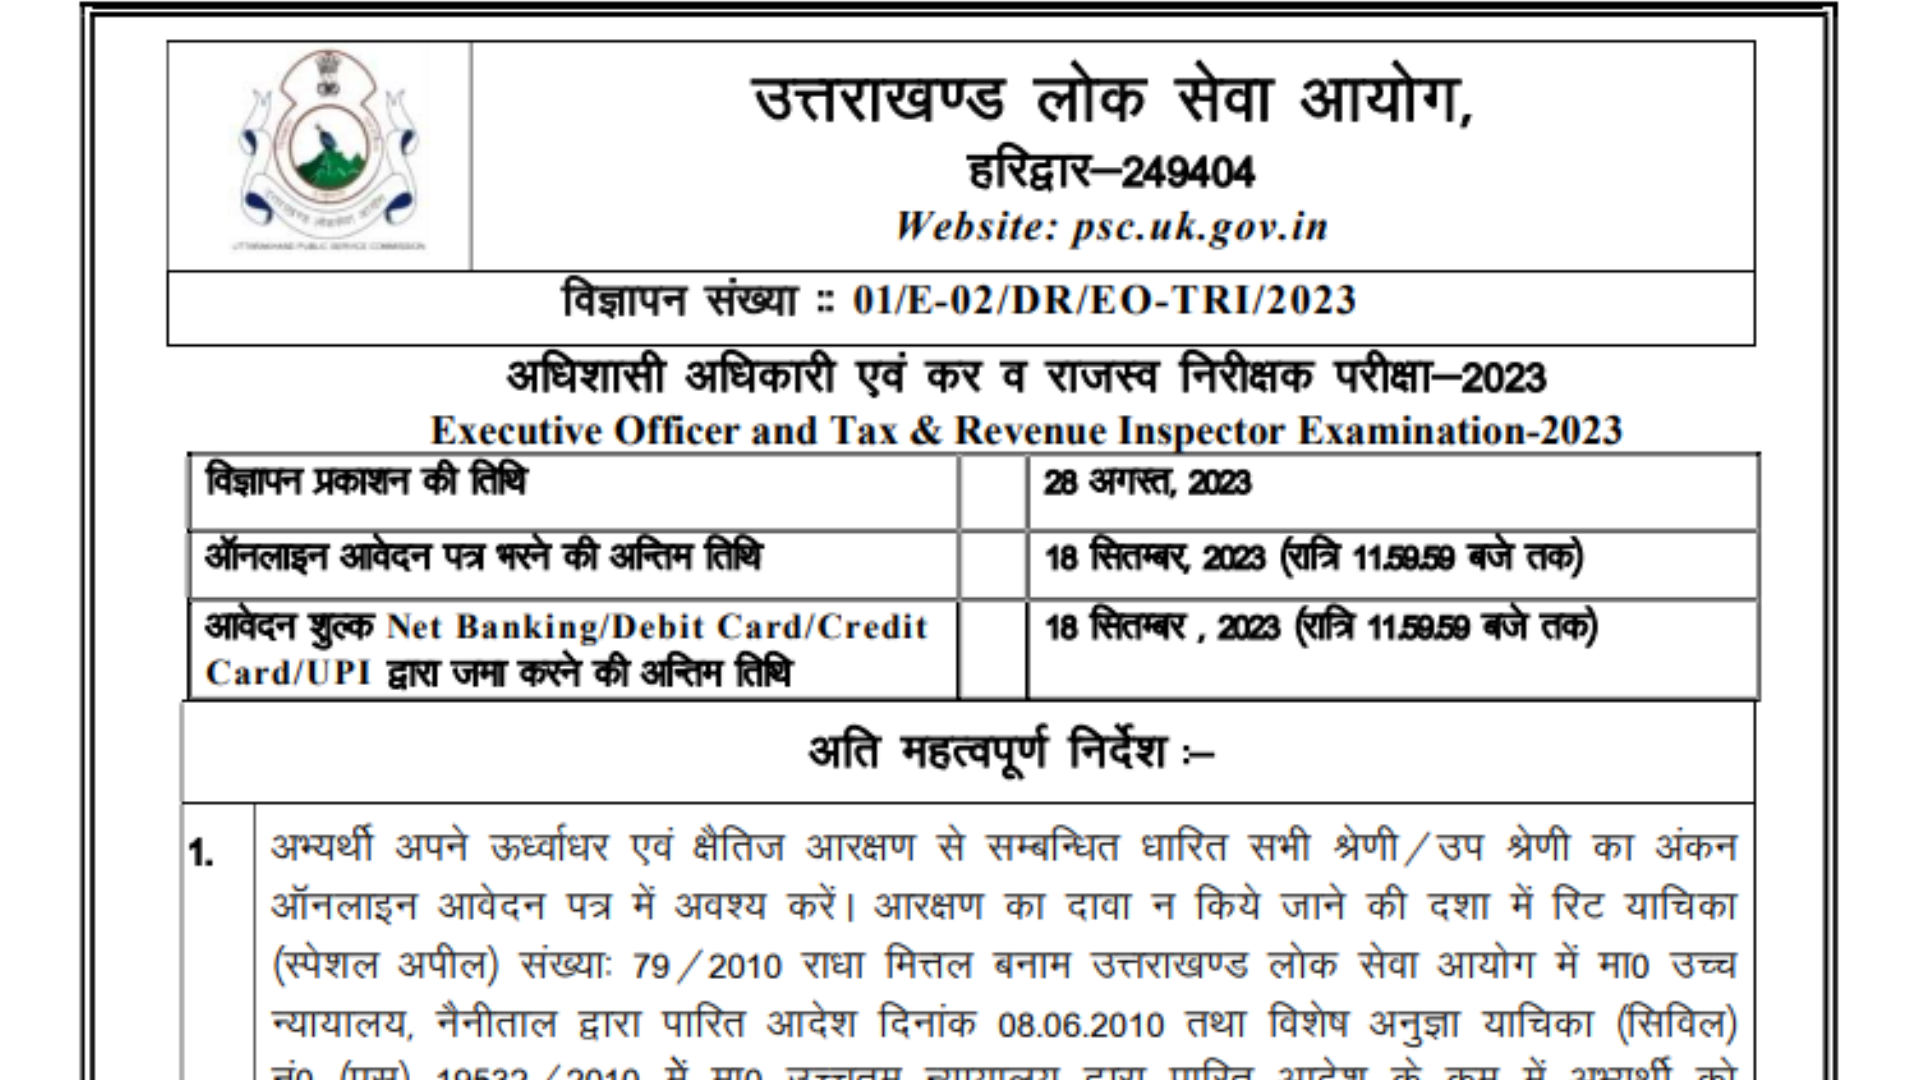 UKPSC Uttarakhand Executive Officer and Tax & Revenue Inspector Examination 2023 Admit Card for 85 Post